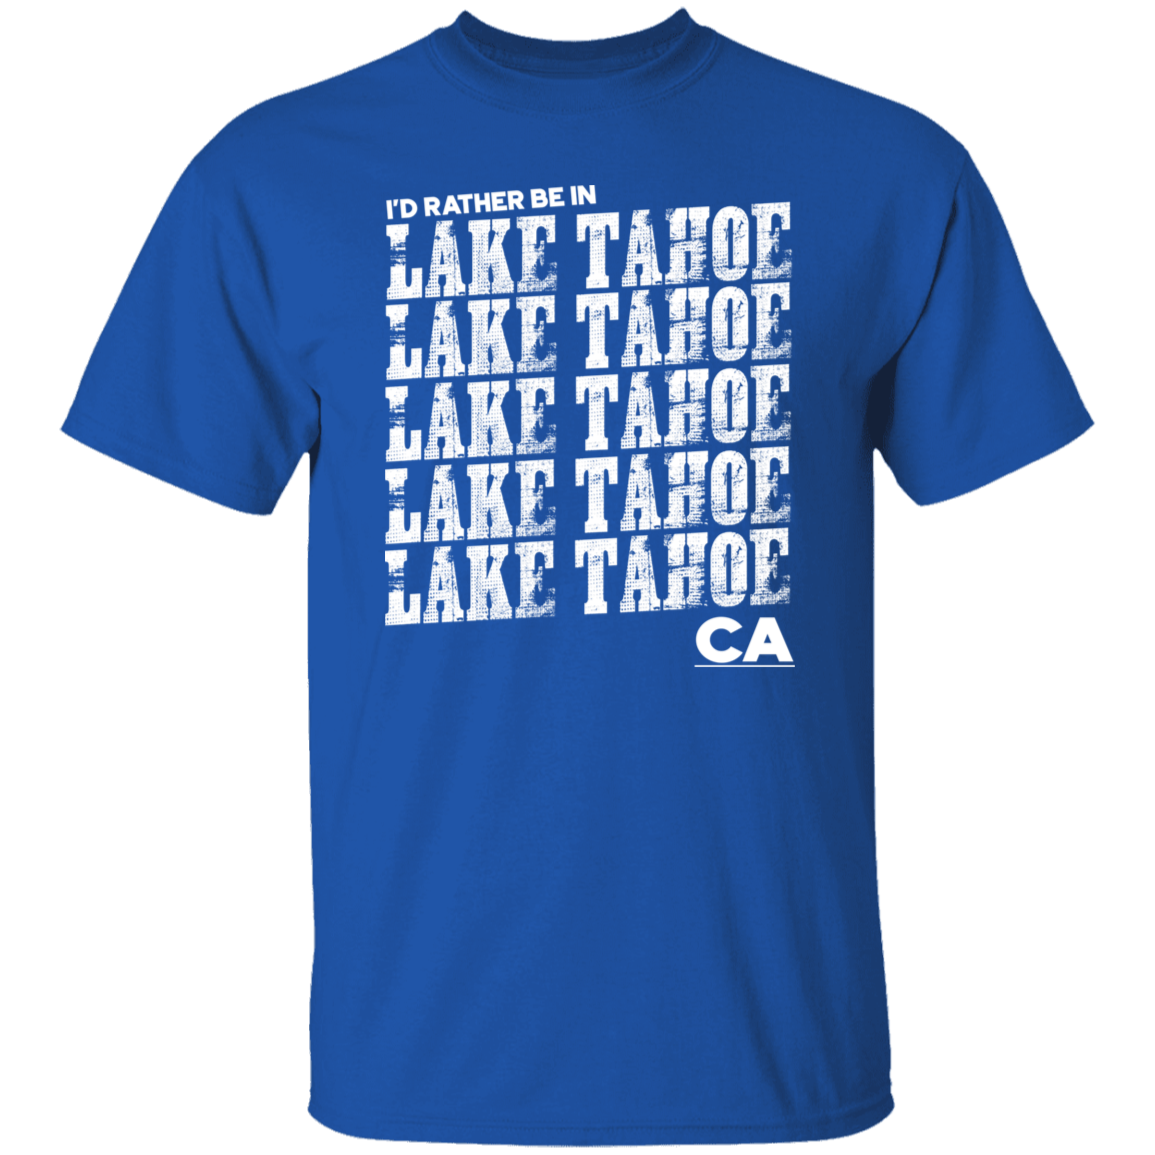 I'd Rather Be In Lake Tahoe CA White Print T-Shirt